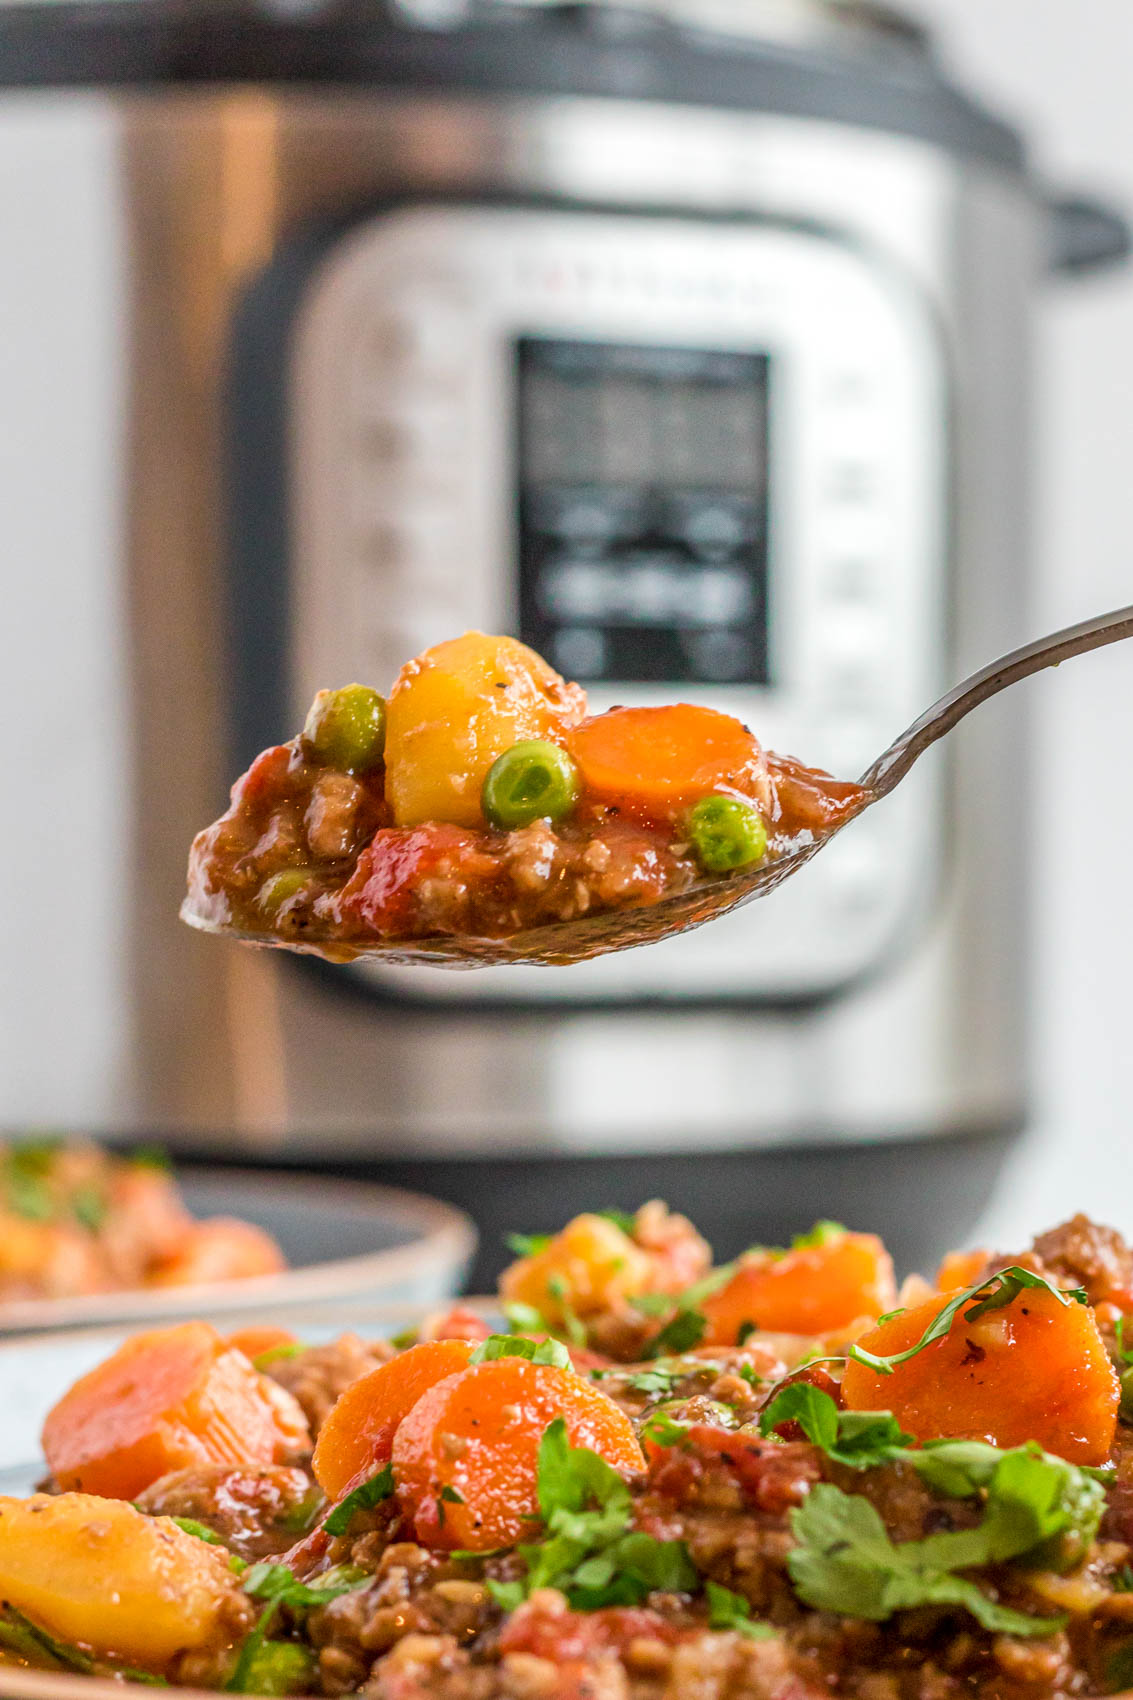 spoonful of vegetable hamburger stew with carrots, peas, and potatoes